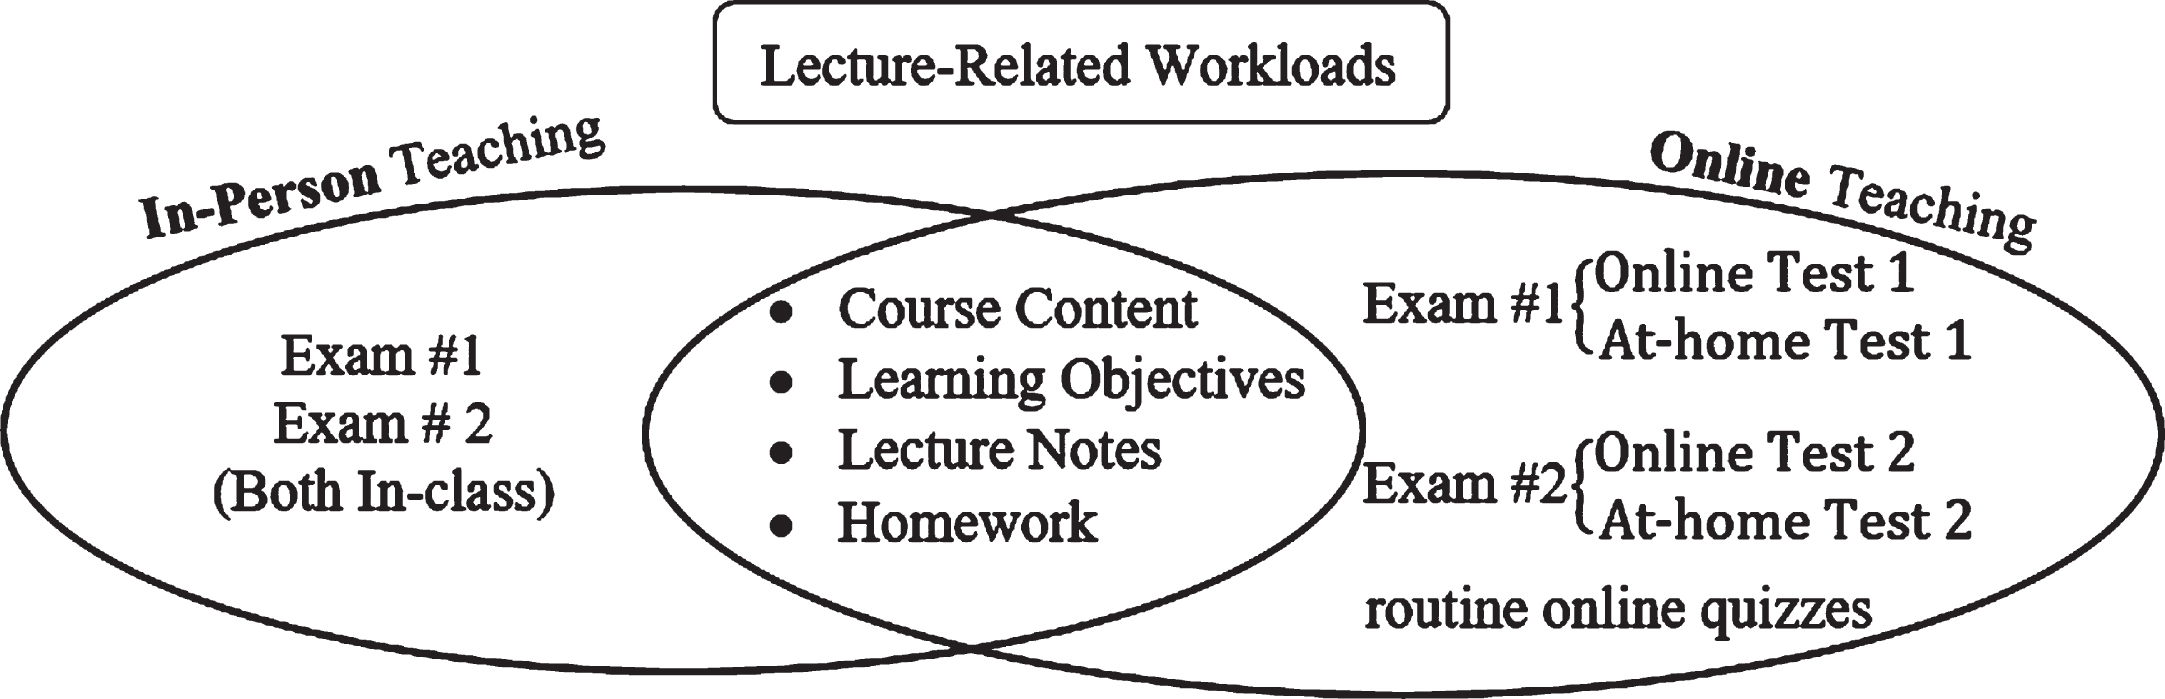 Lecture-related workloads conducted in-person vs. online.